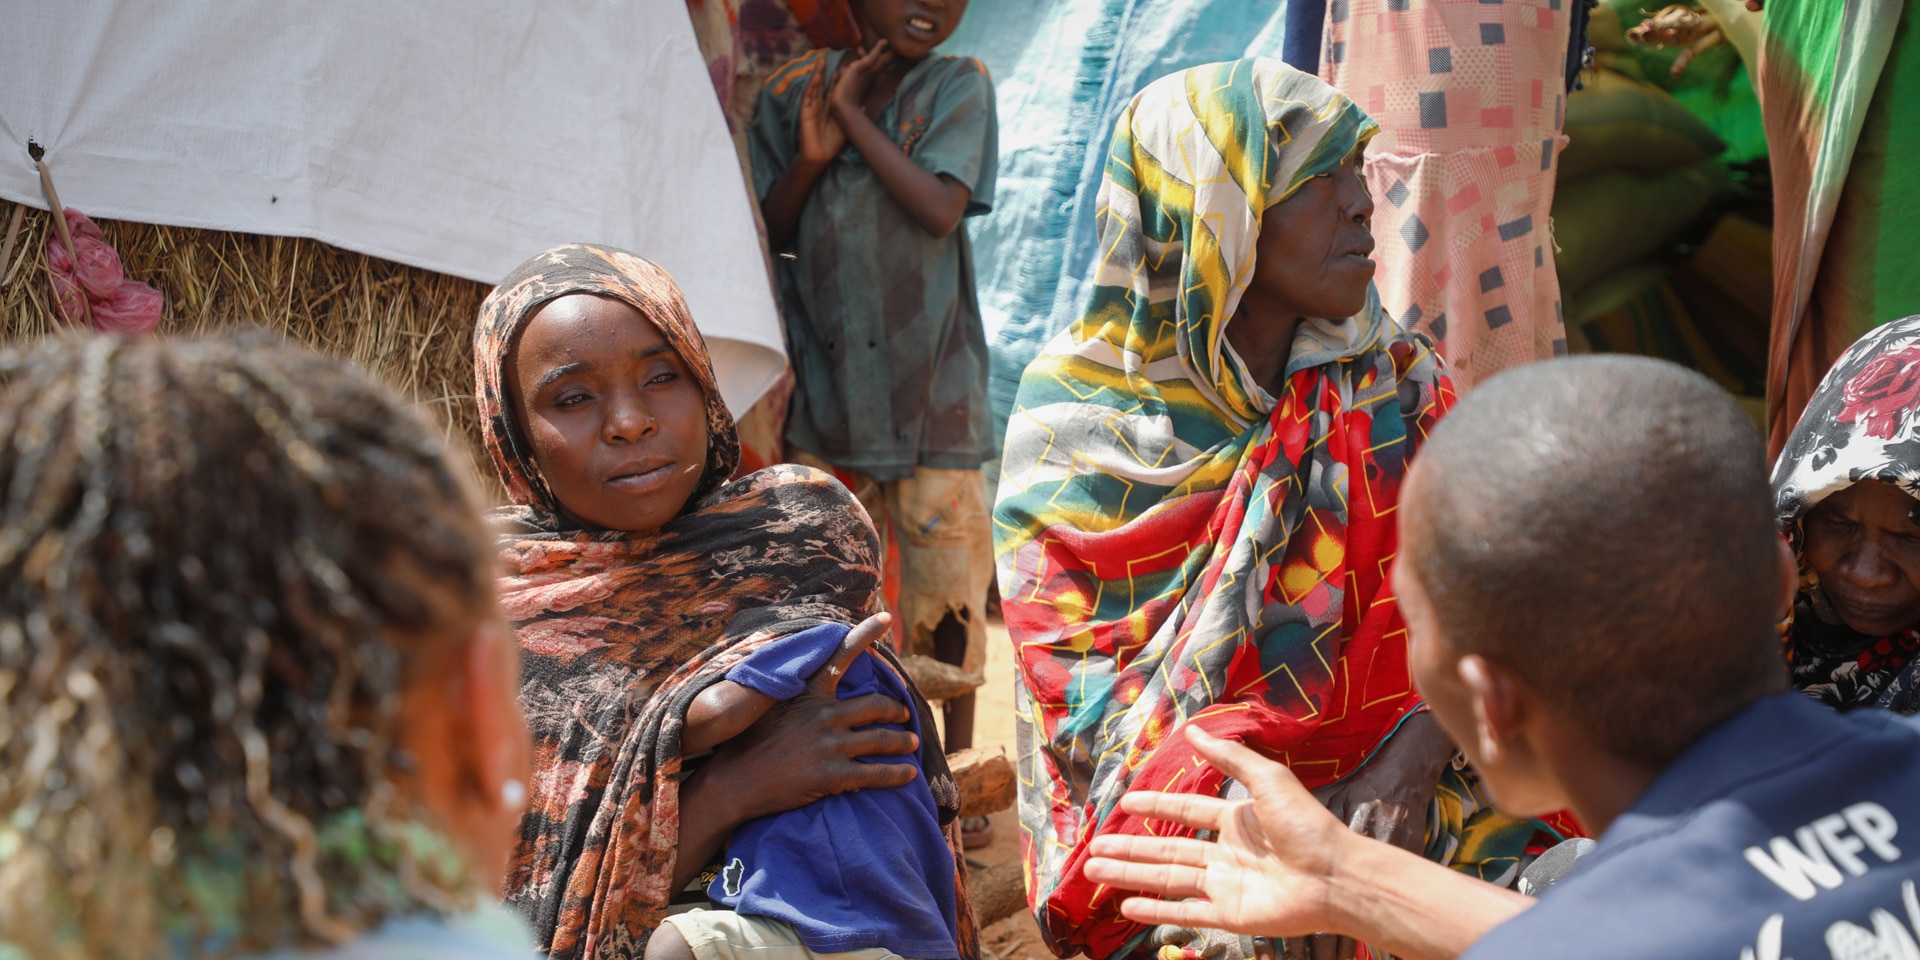 Aid workers, with Patricia Danzi, talk to women in traditional dress in Chad.